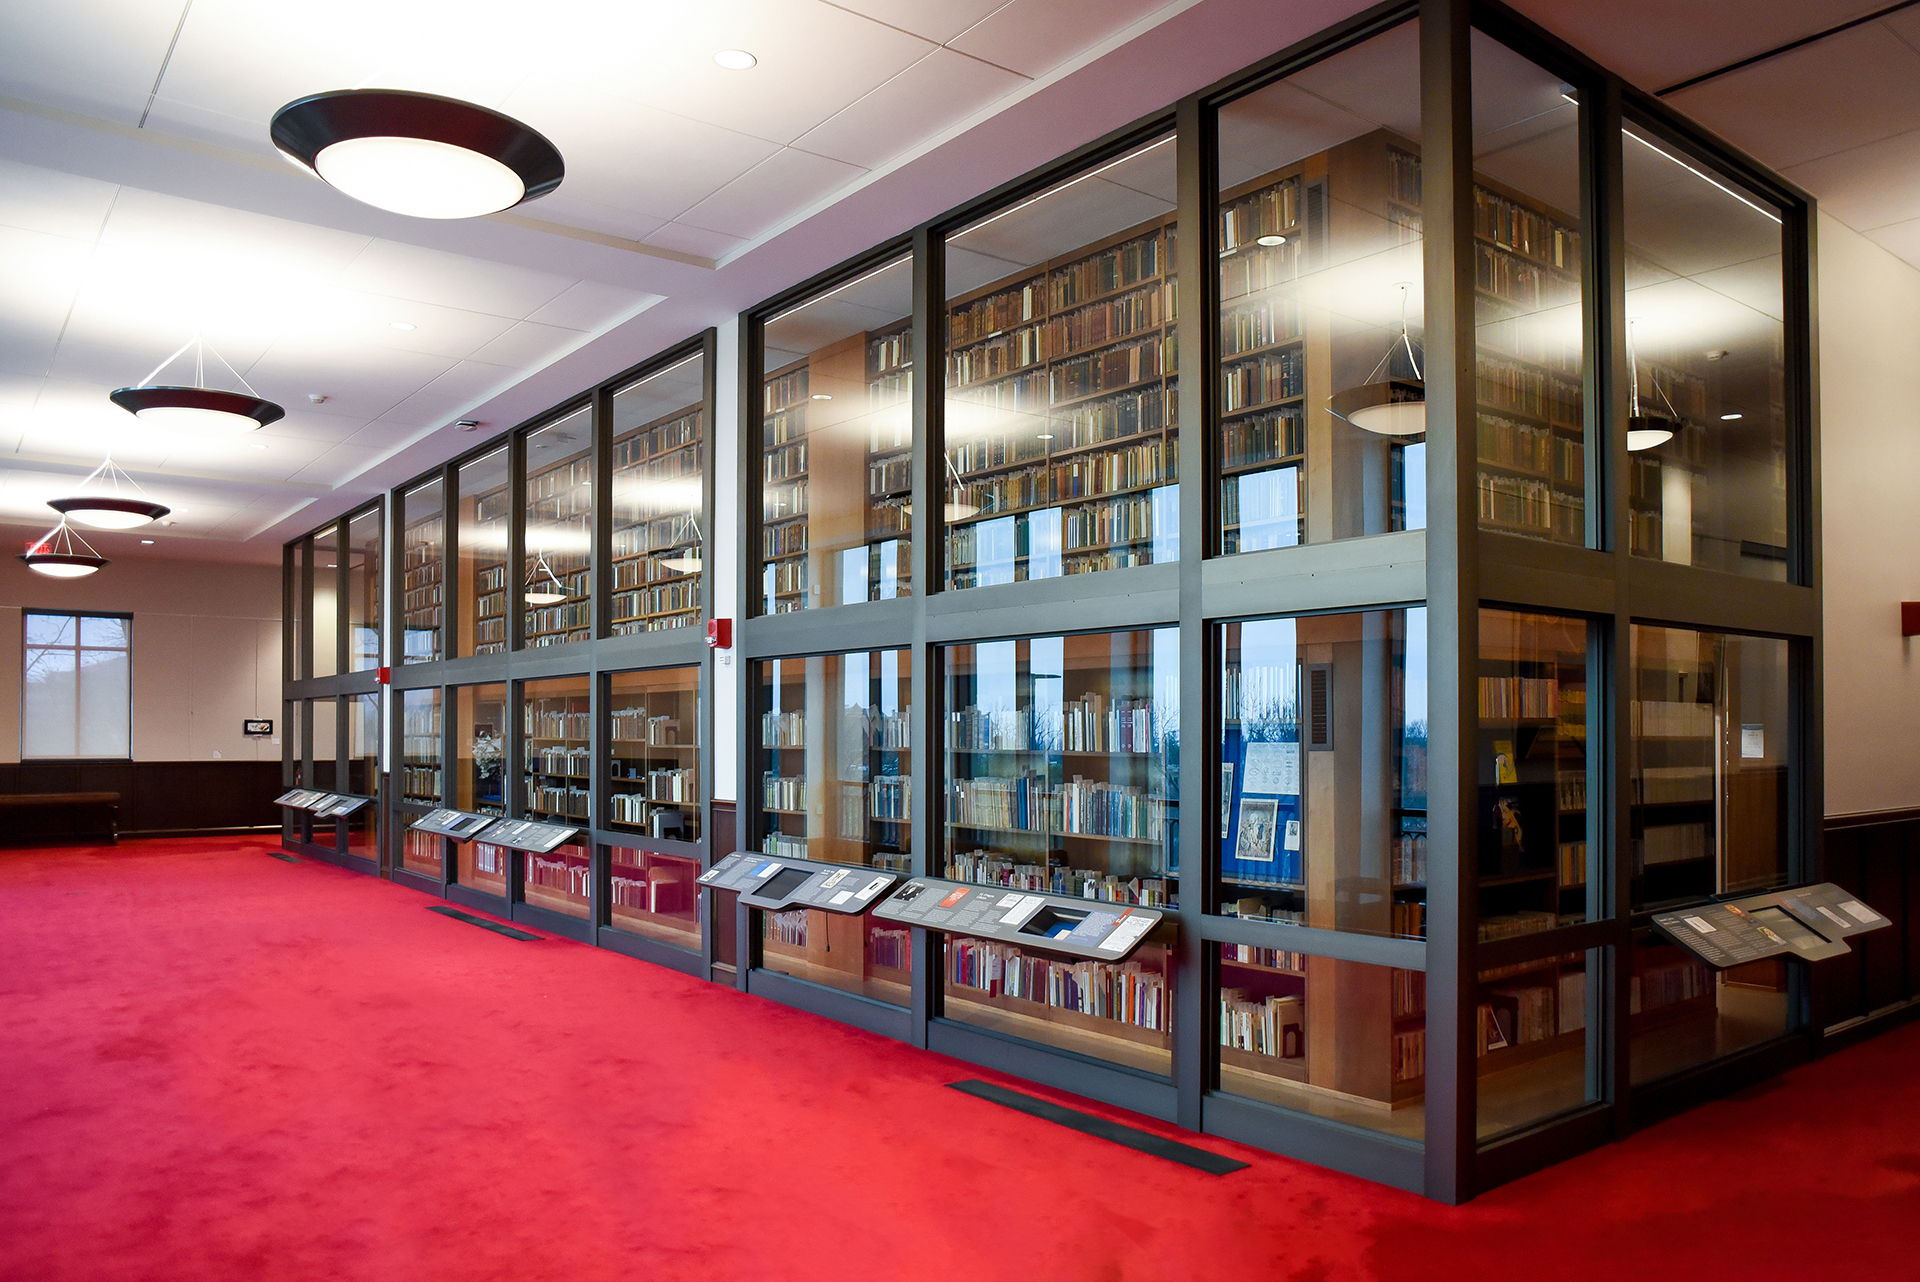 Spencer Research Library's North Gallery